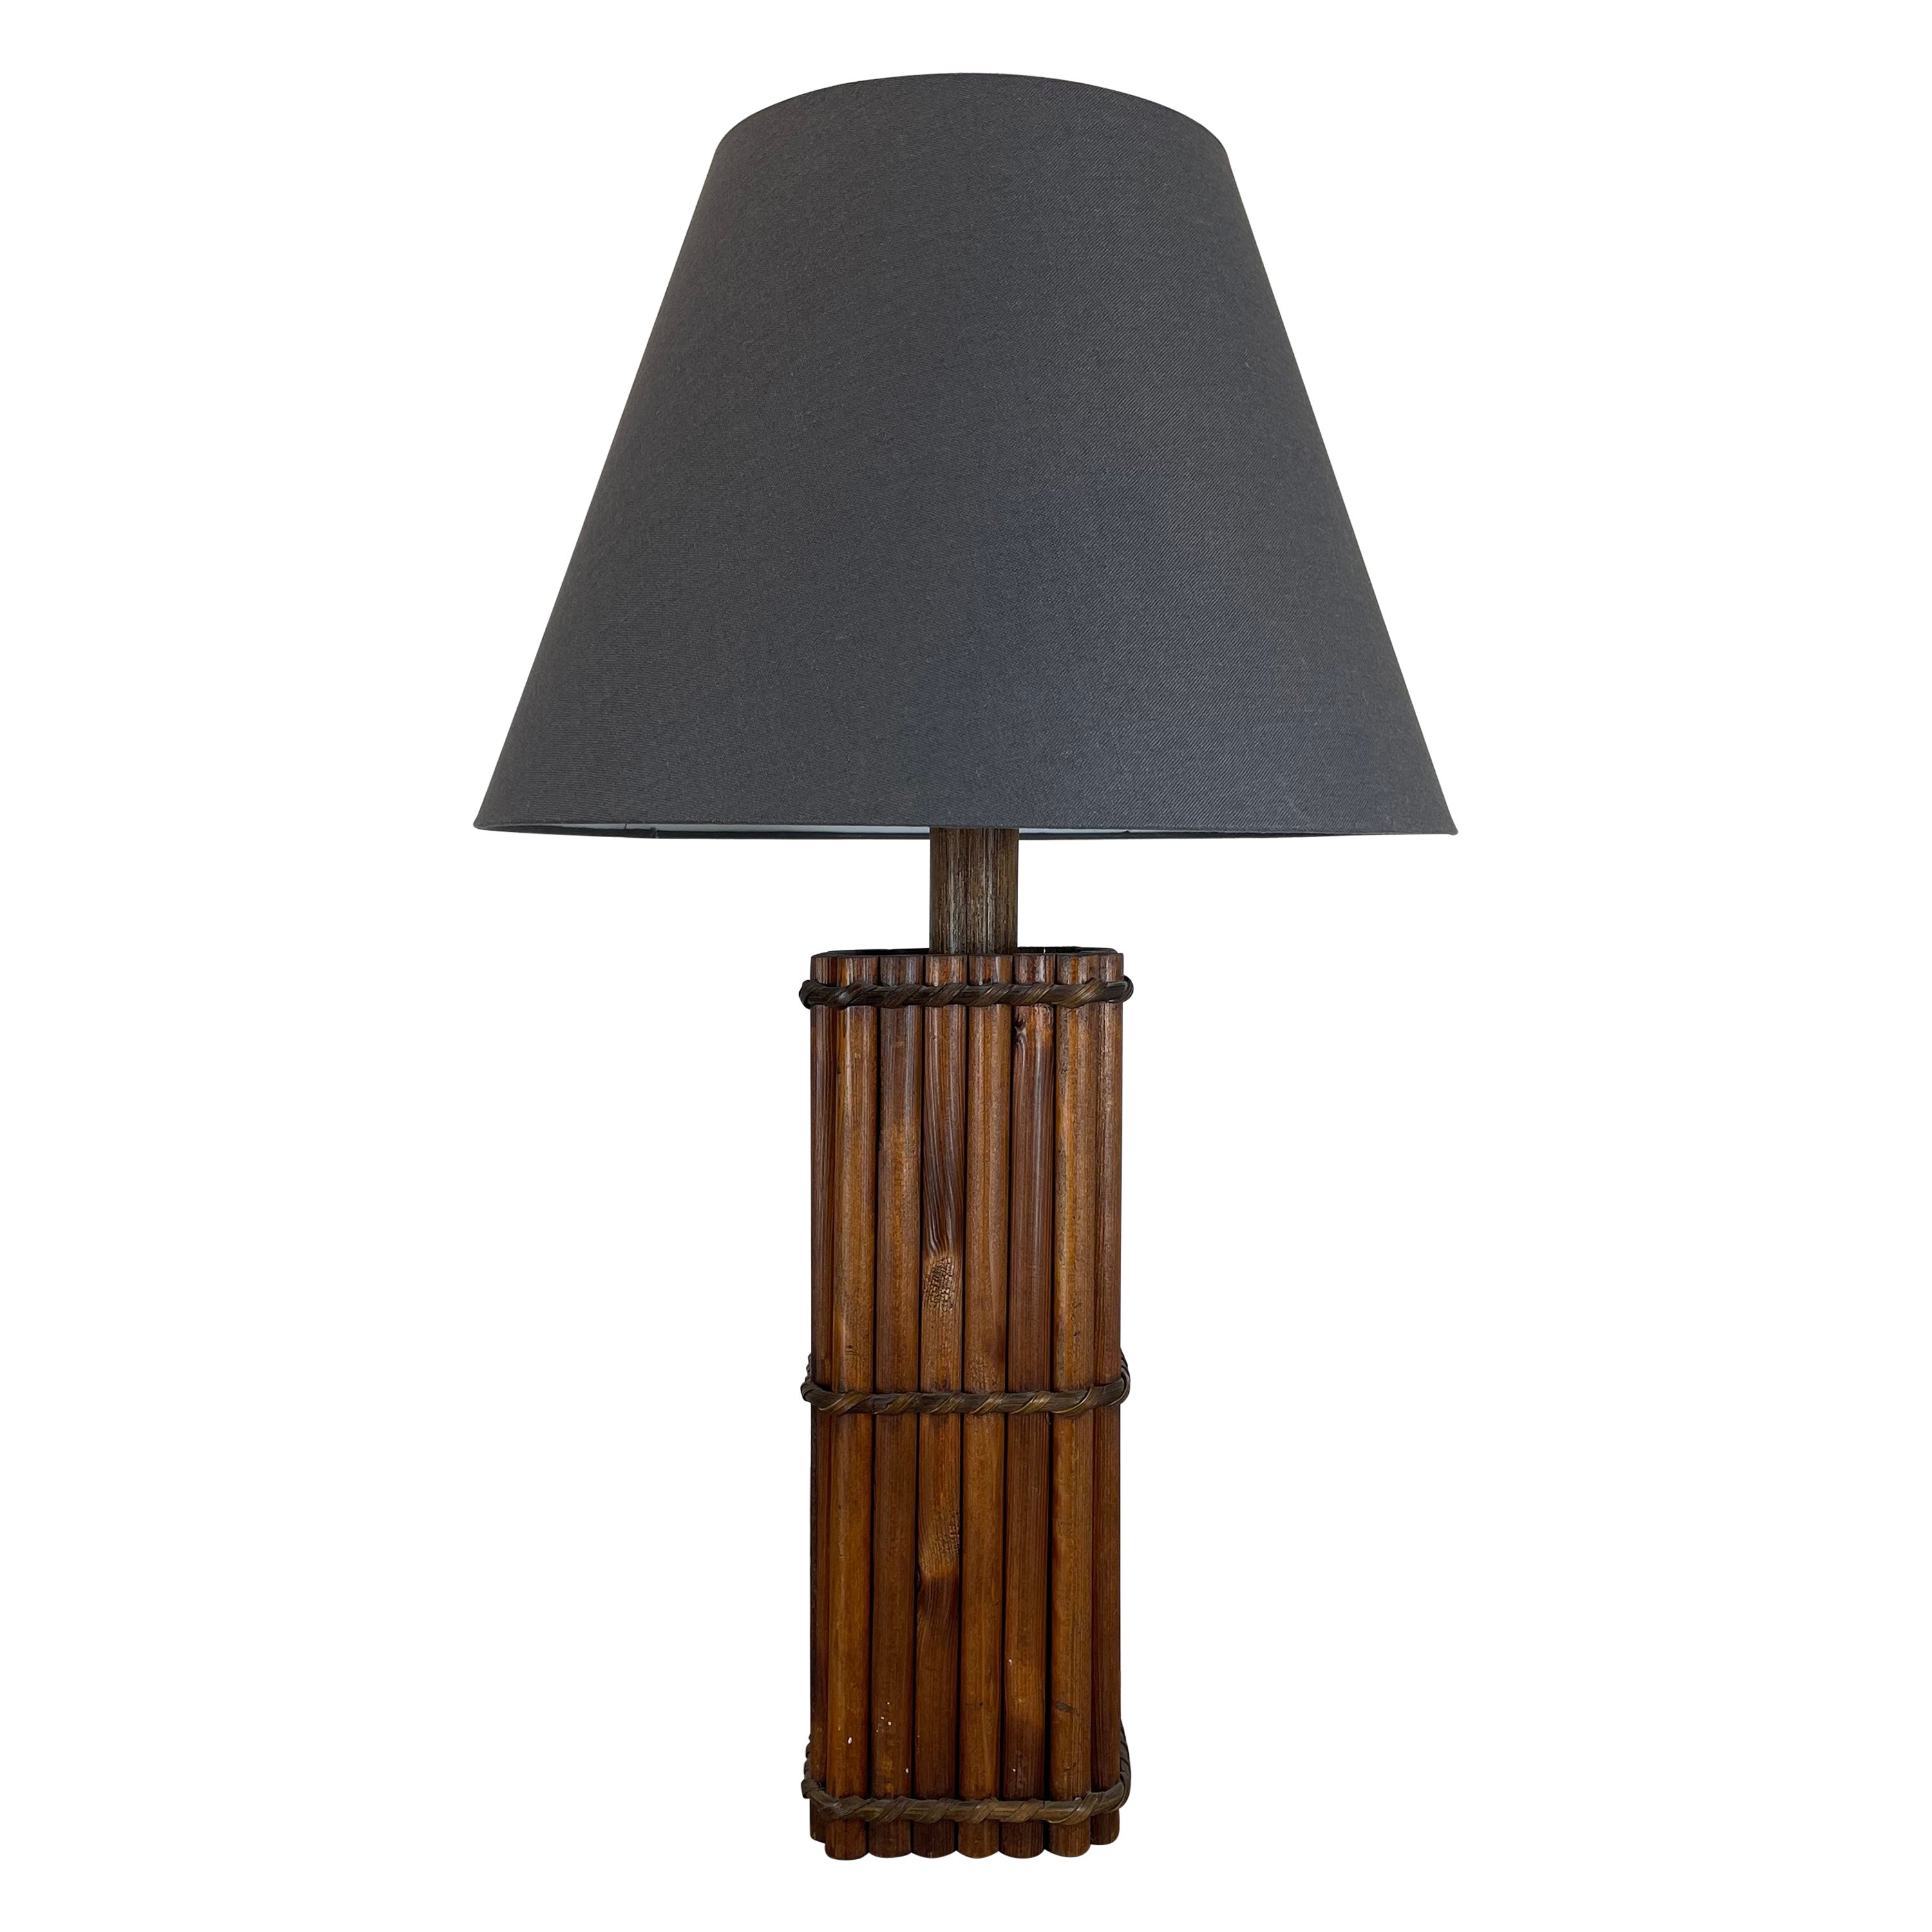 Large 52cm Hollywood Regency Dark Wooden Tiki Style Table Light, Italy 1970s For Sale